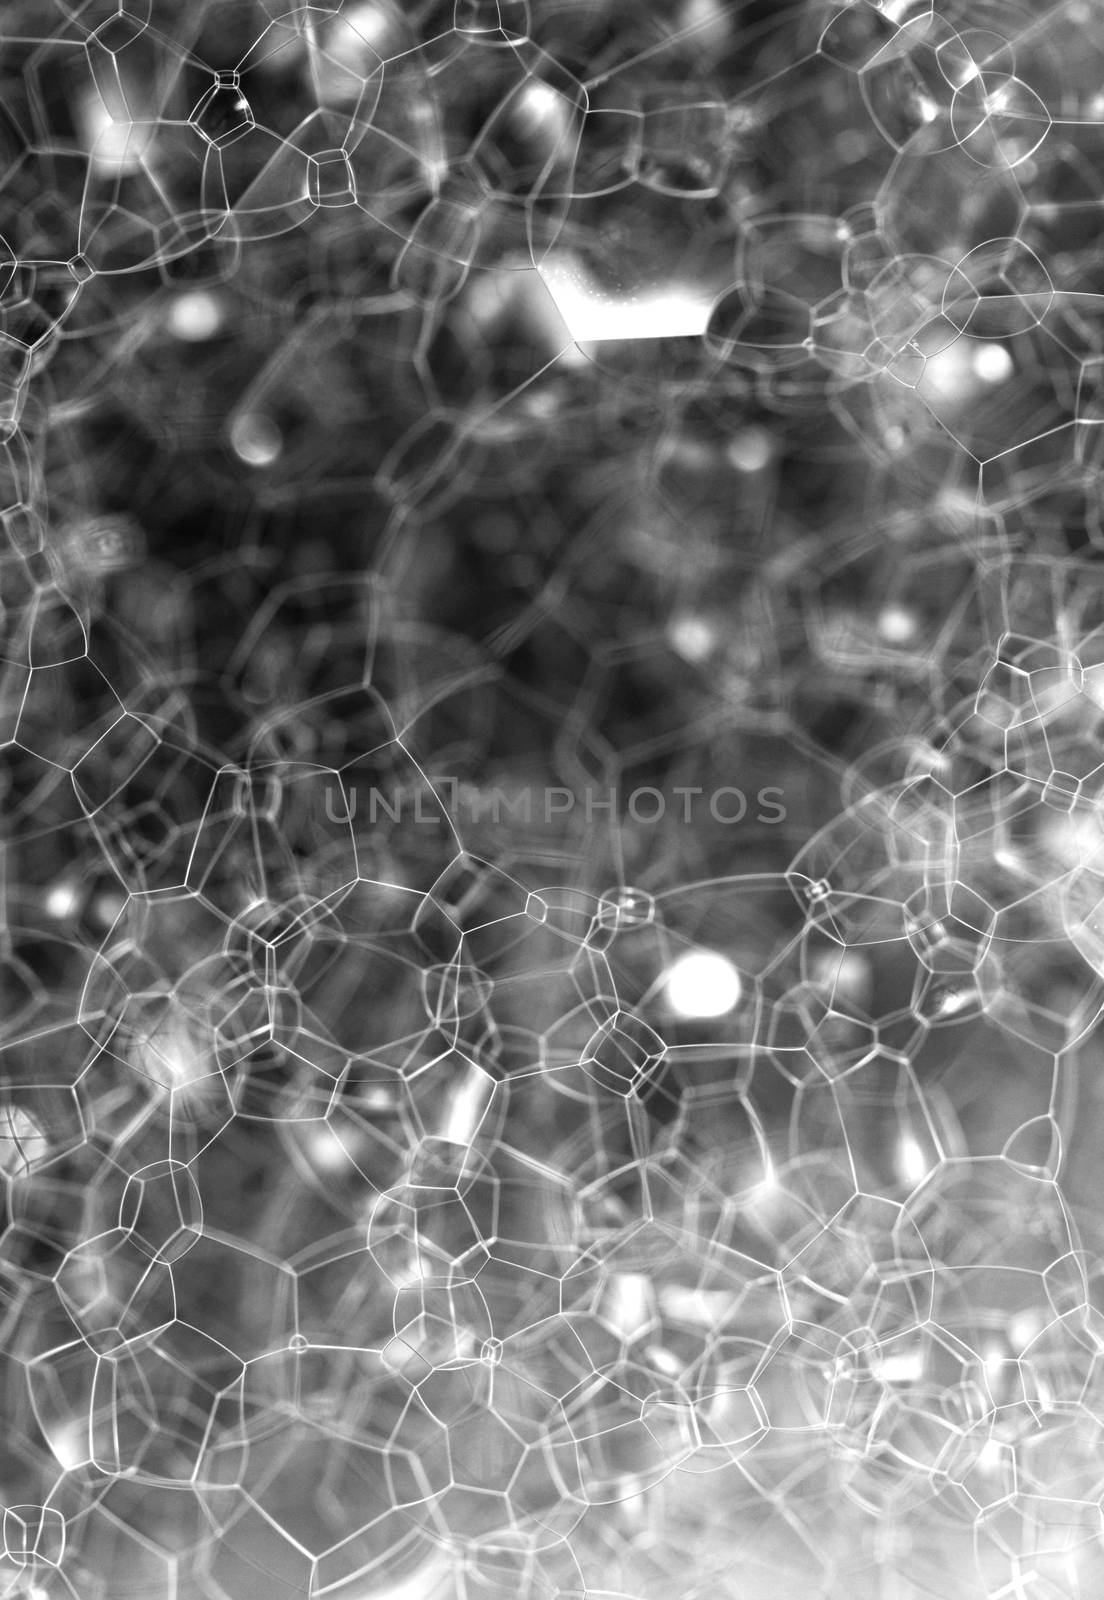 The surface of the bubble - macro photo